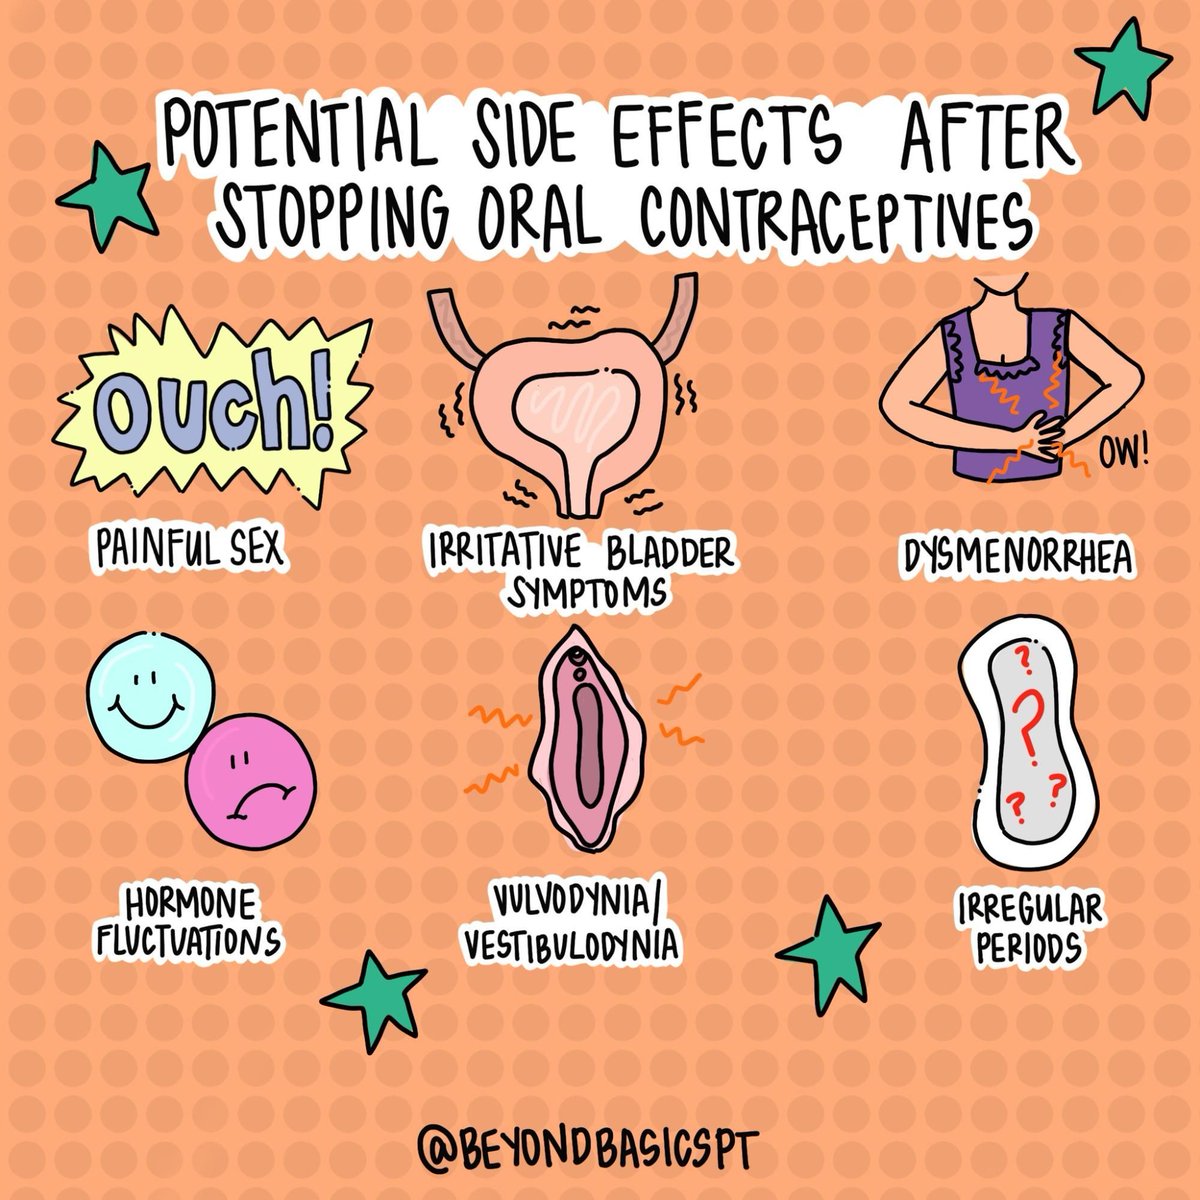 Let's discuss a topic that's often overlooked: potential side effects after stopping #oralcontraceptives. It's important to be informed about these changes to better navigate your health journey. #birthcontrol #hormonalhealth #dyspareunia #vestibulodynia